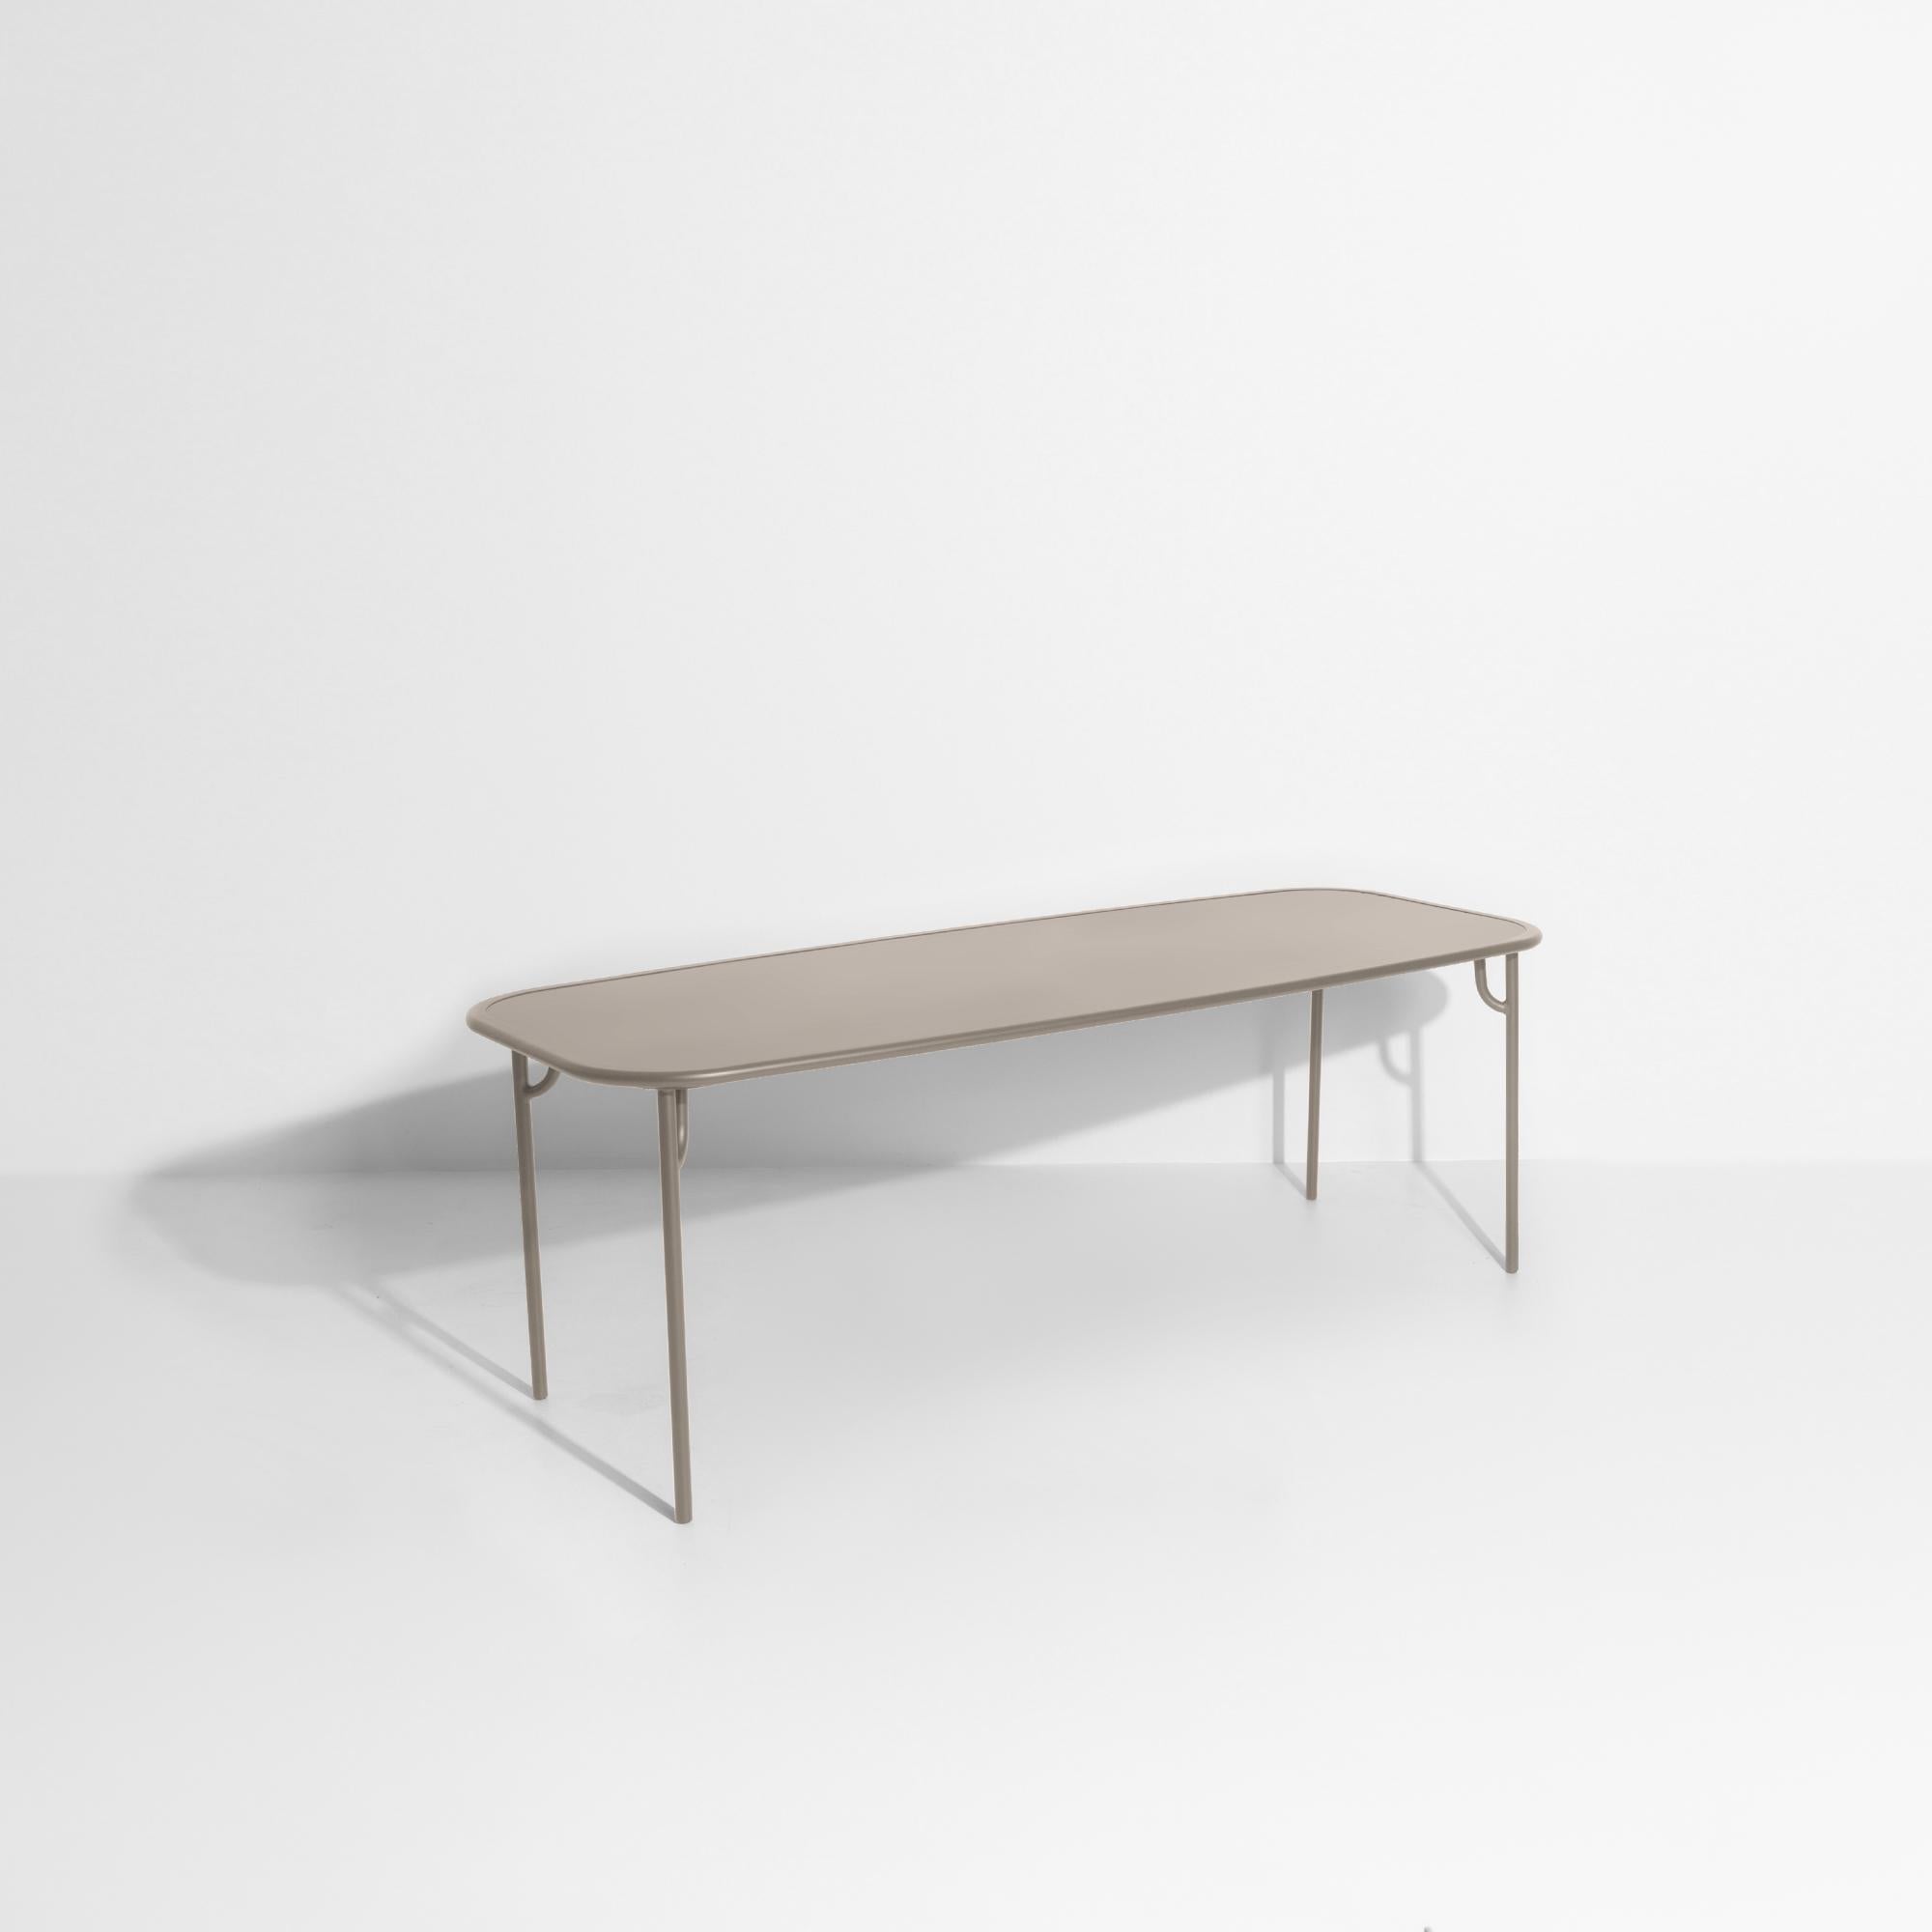 Petite Friture Week-End Large Plain Rectangular Dining Table in Dune Aluminium by Studio BrichetZiegler, 2017

The week-end collection is a full range of outdoor furniture, in aluminium grained epoxy paint, matt finish, that includes 18 functions